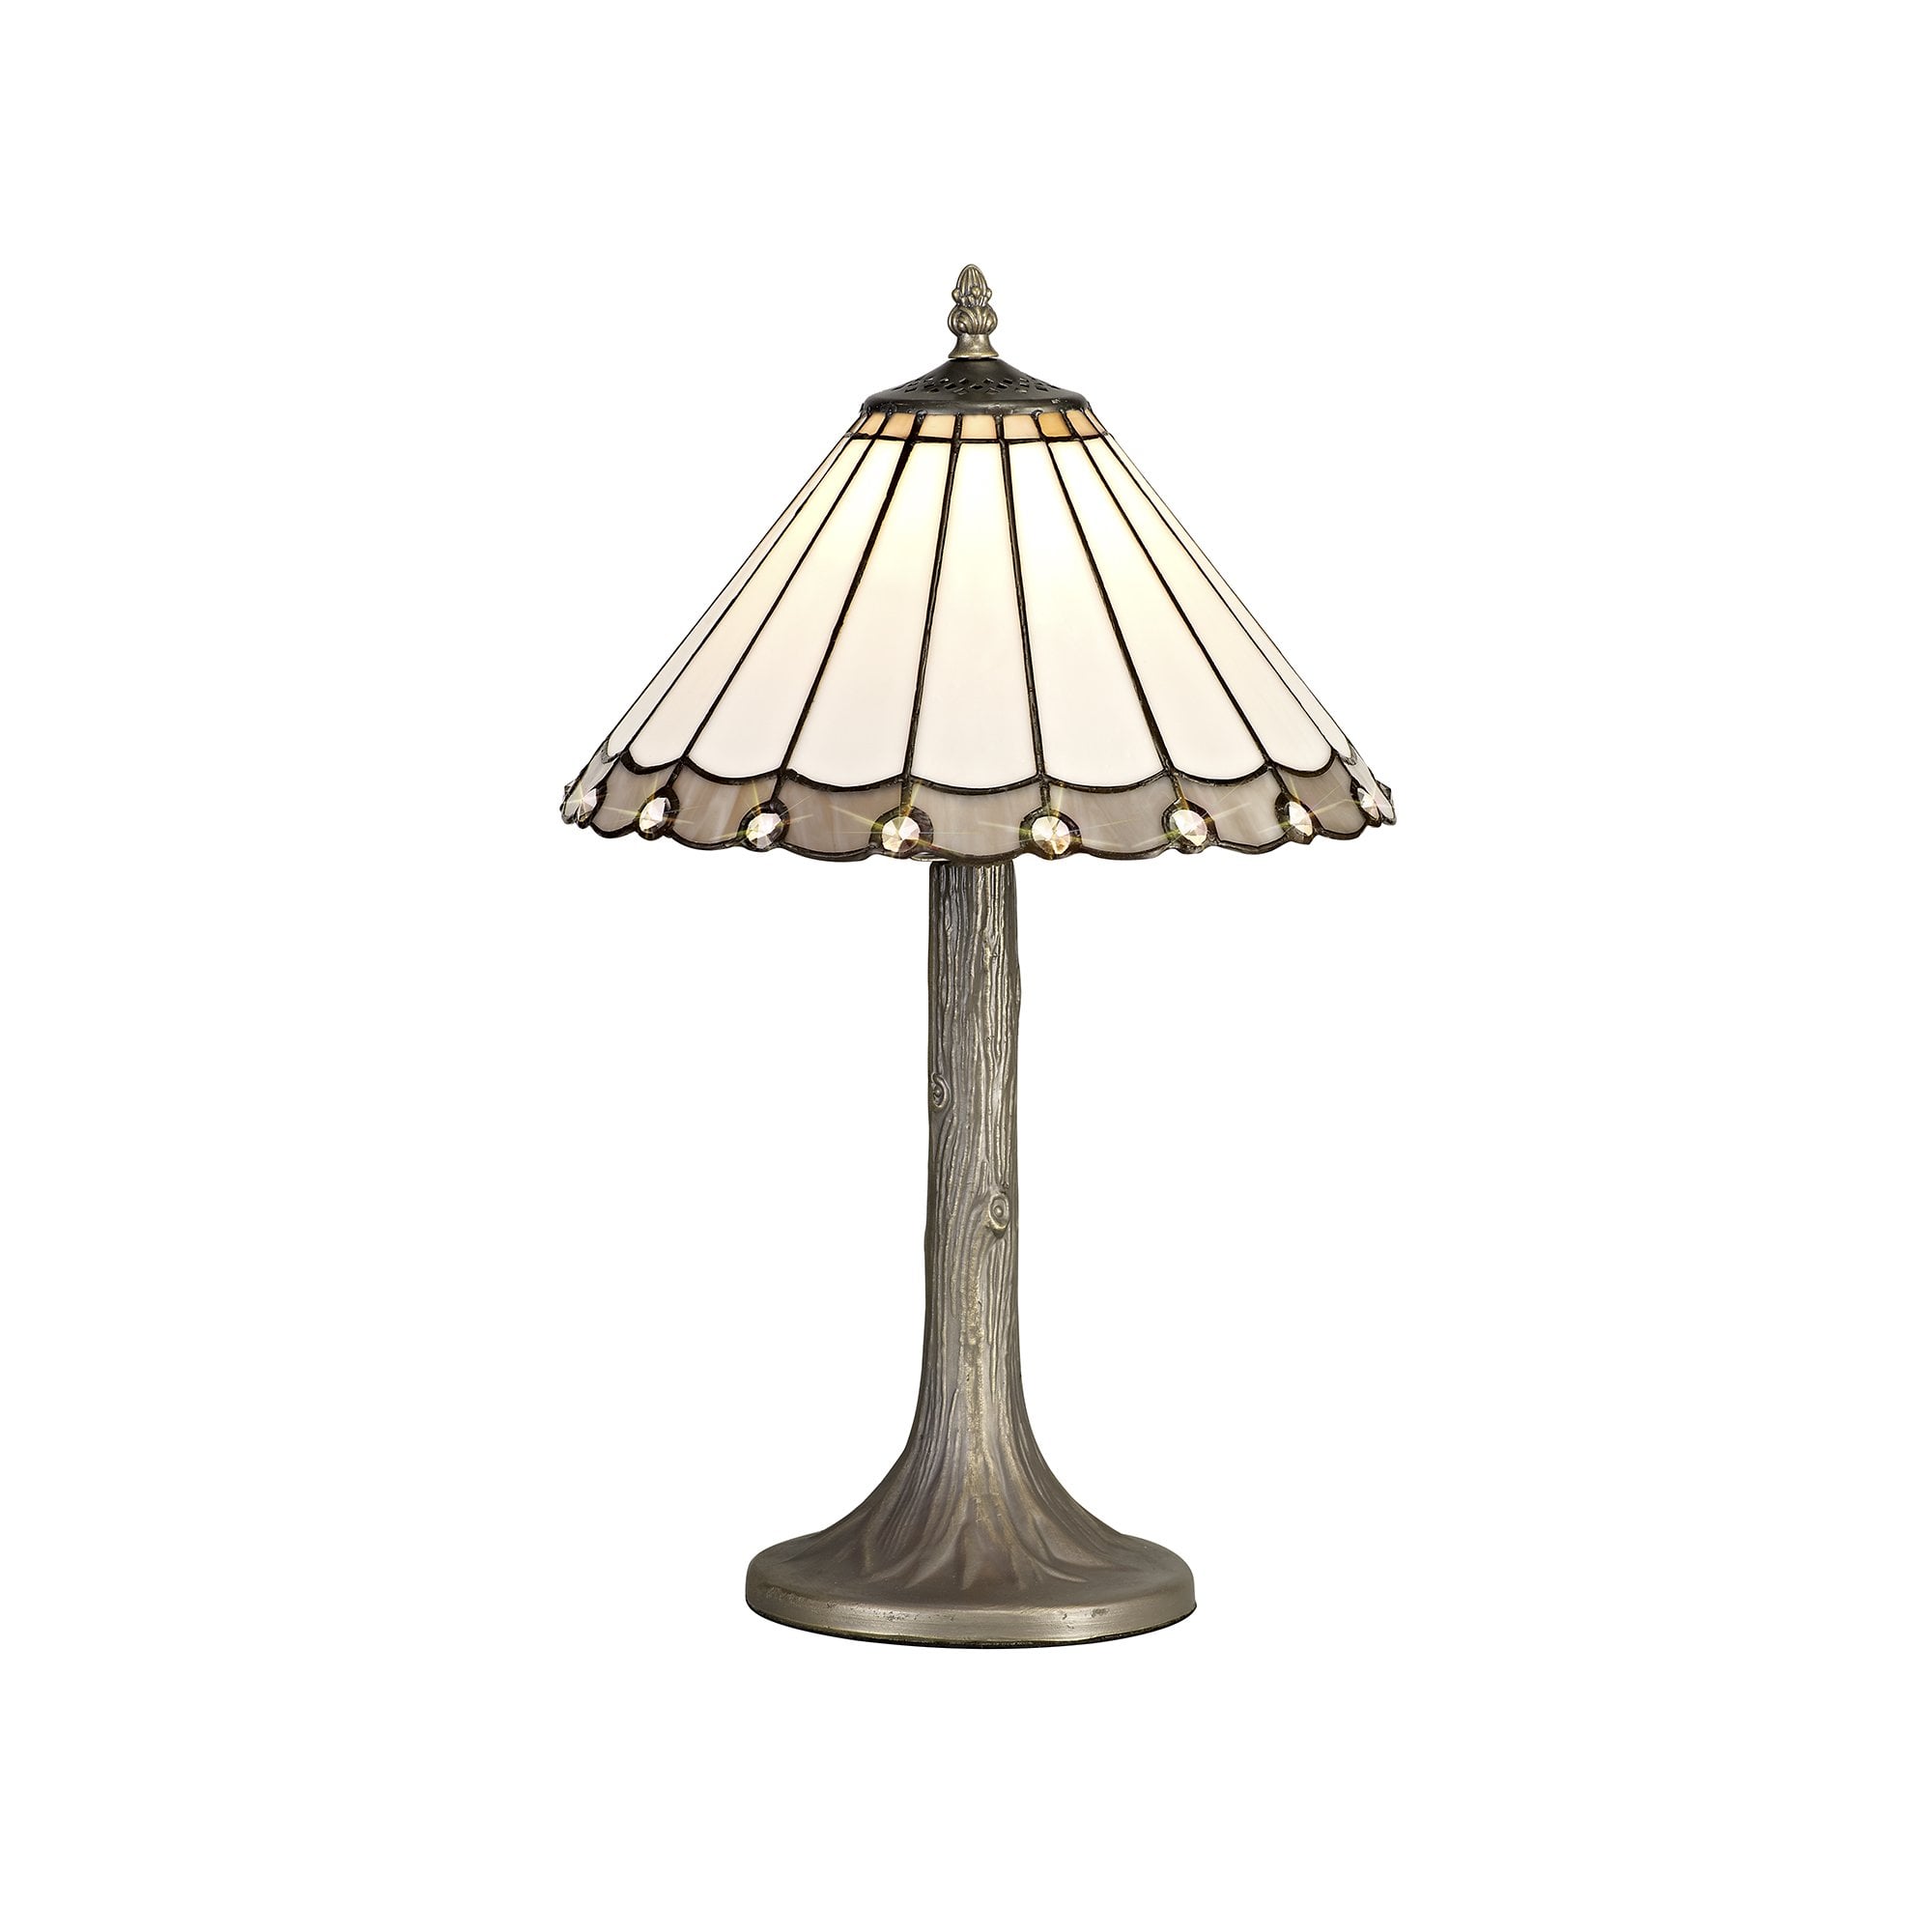 1 Light Tree Like Table Lamp E27 With 30cm Tiffany Shade, Grey/Cream/Crystal/Aged Antique Brass